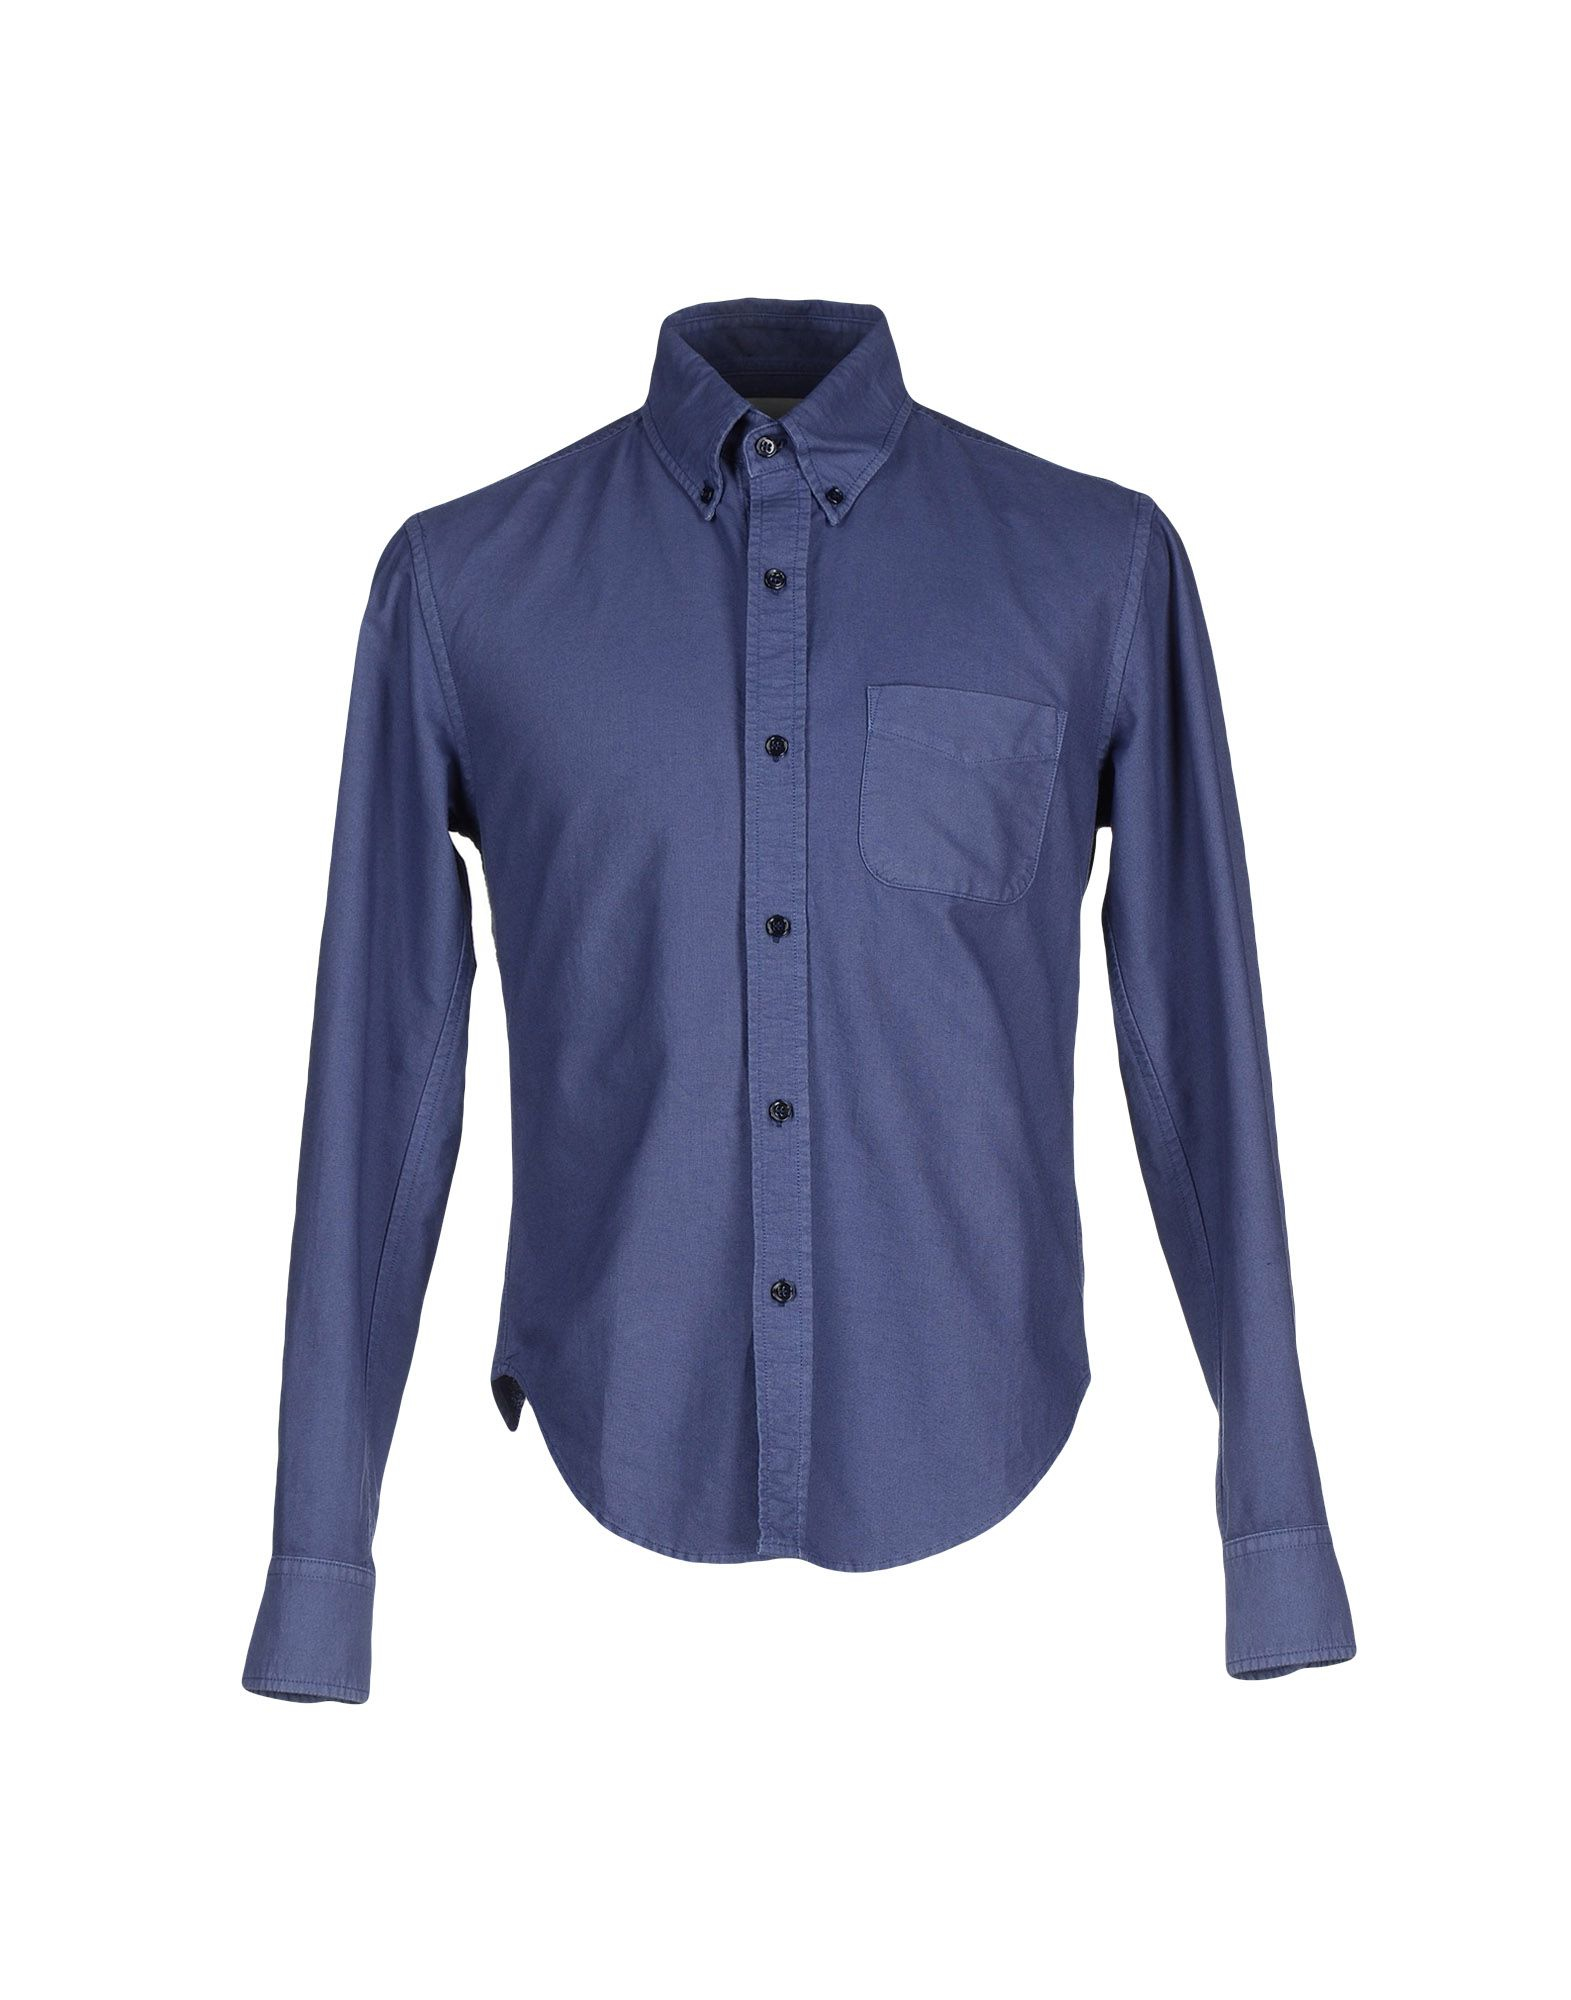 Lyst - Band Of Outsiders Shirt in Blue for Men